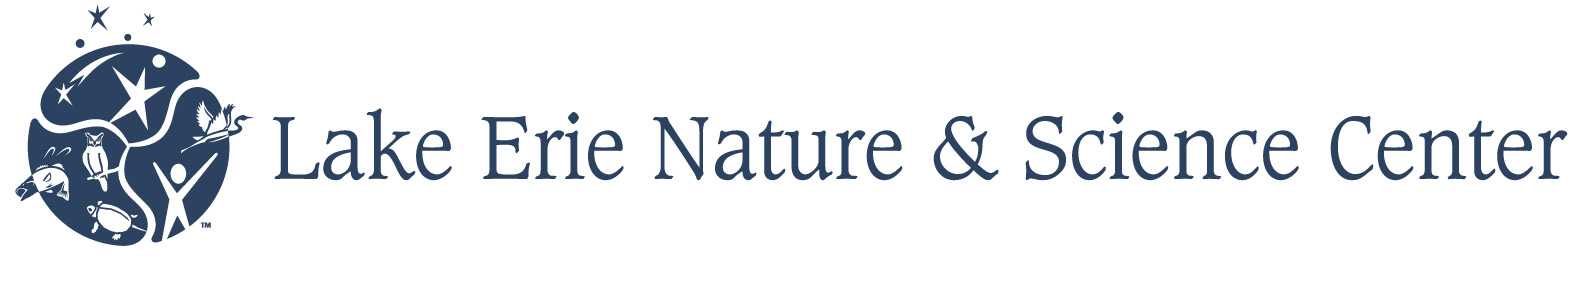 Lake Erie Nature and Science Center logo